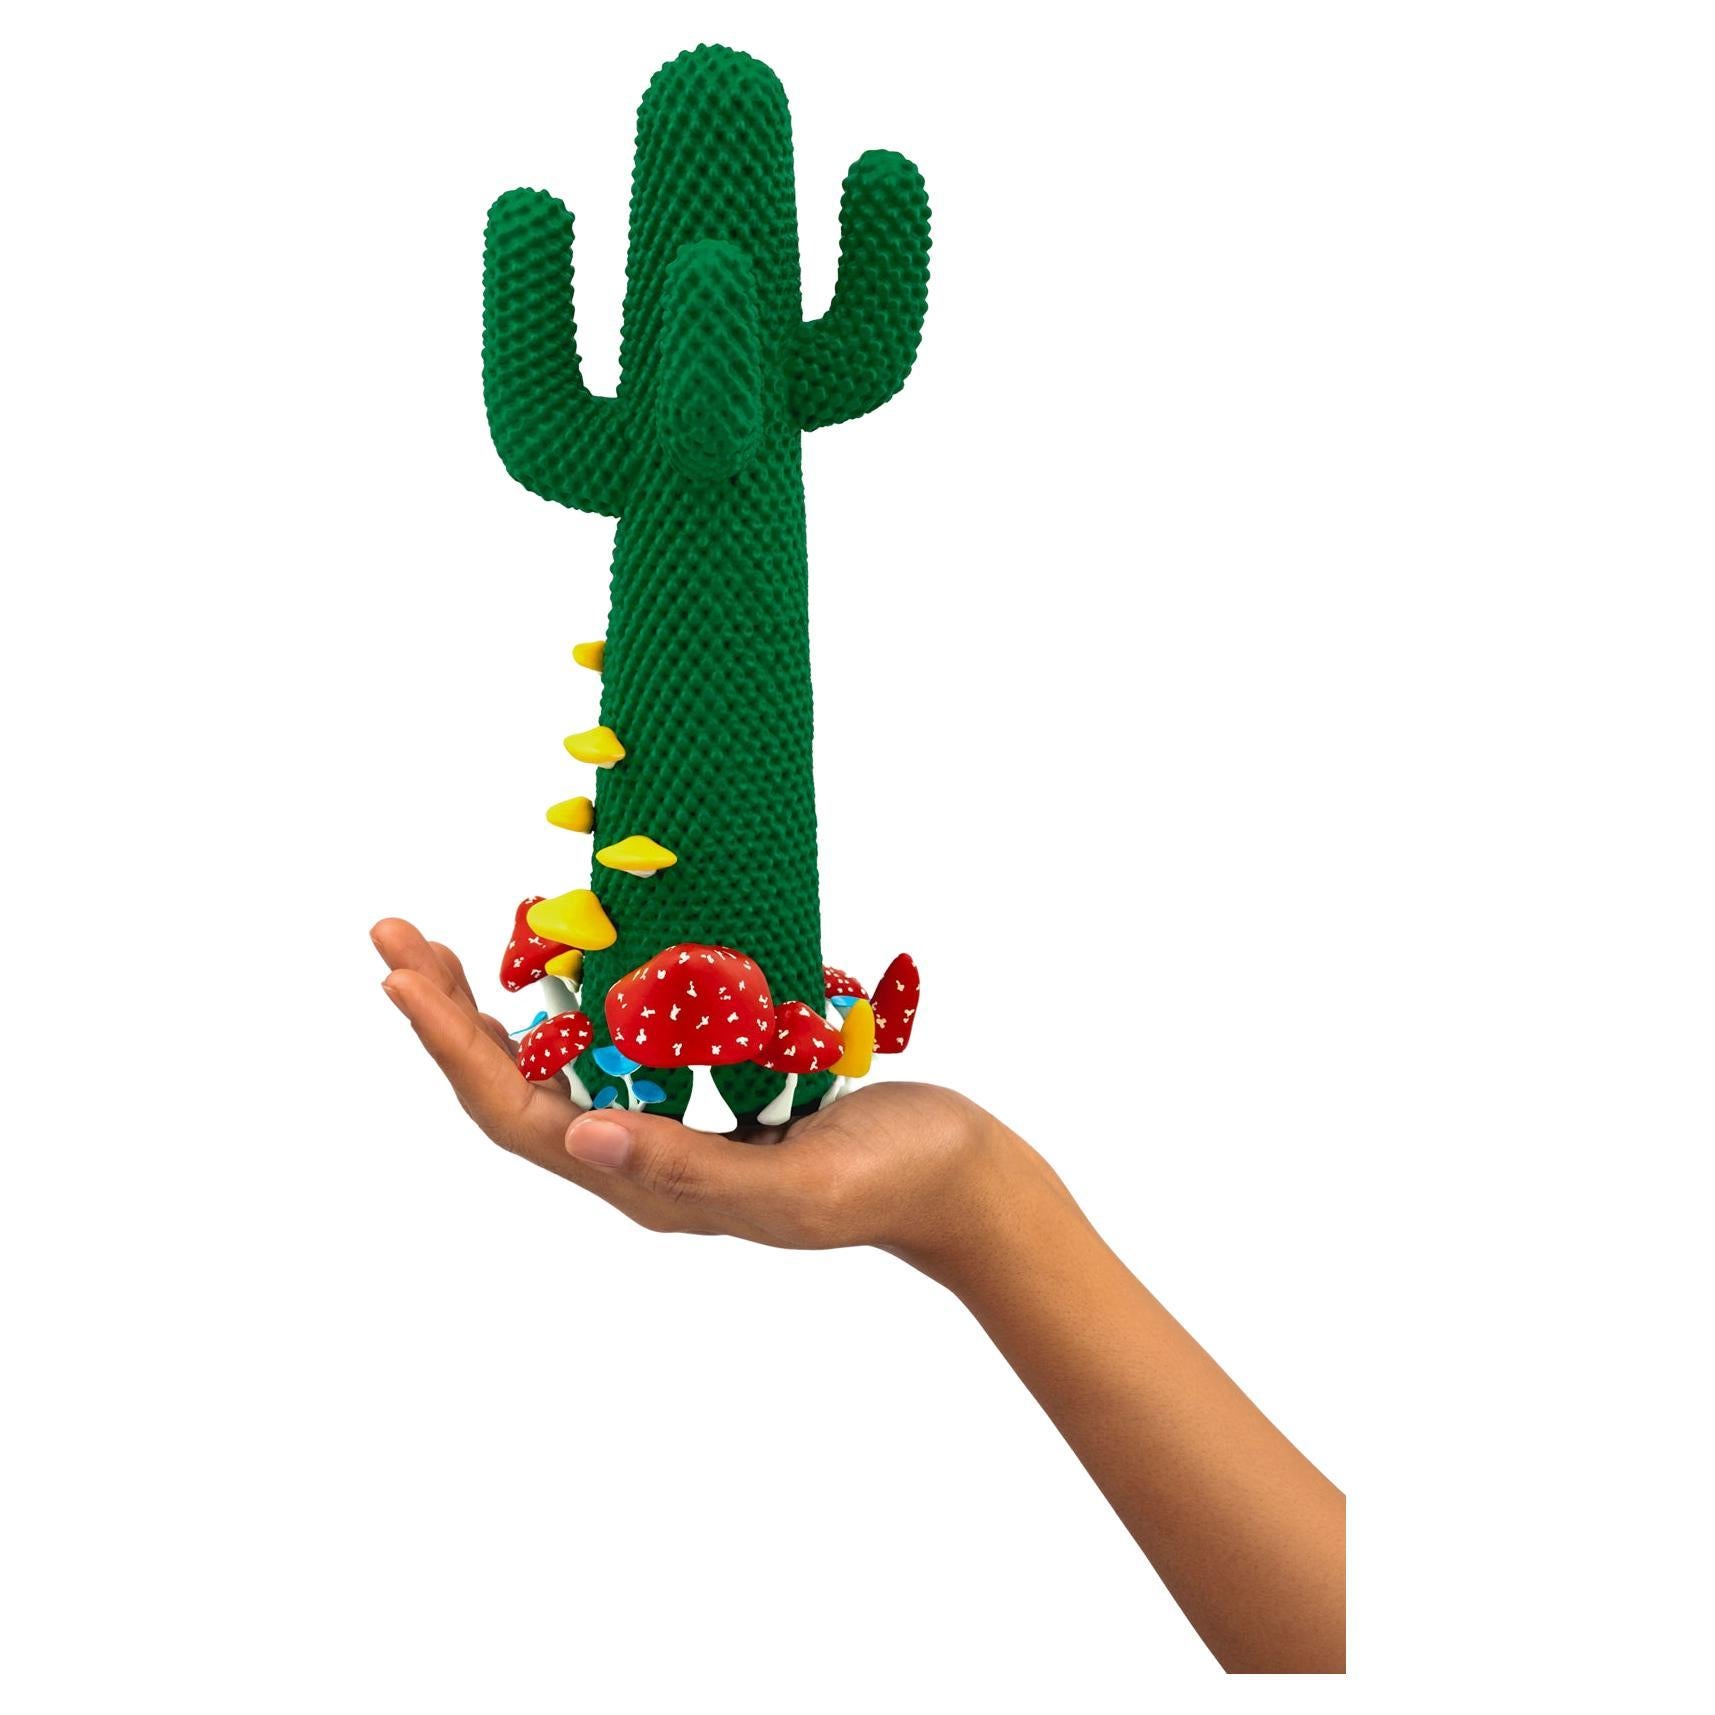 Limited Edition #35/99

Gufram presents the miniaturised version of the Shroom CACTUS® created in collaboration with A$AP Rocky and the artist’s new design studio HOMMEMADE Exactly as the real-size Shroom CACTUS®, the new Guframini piece features